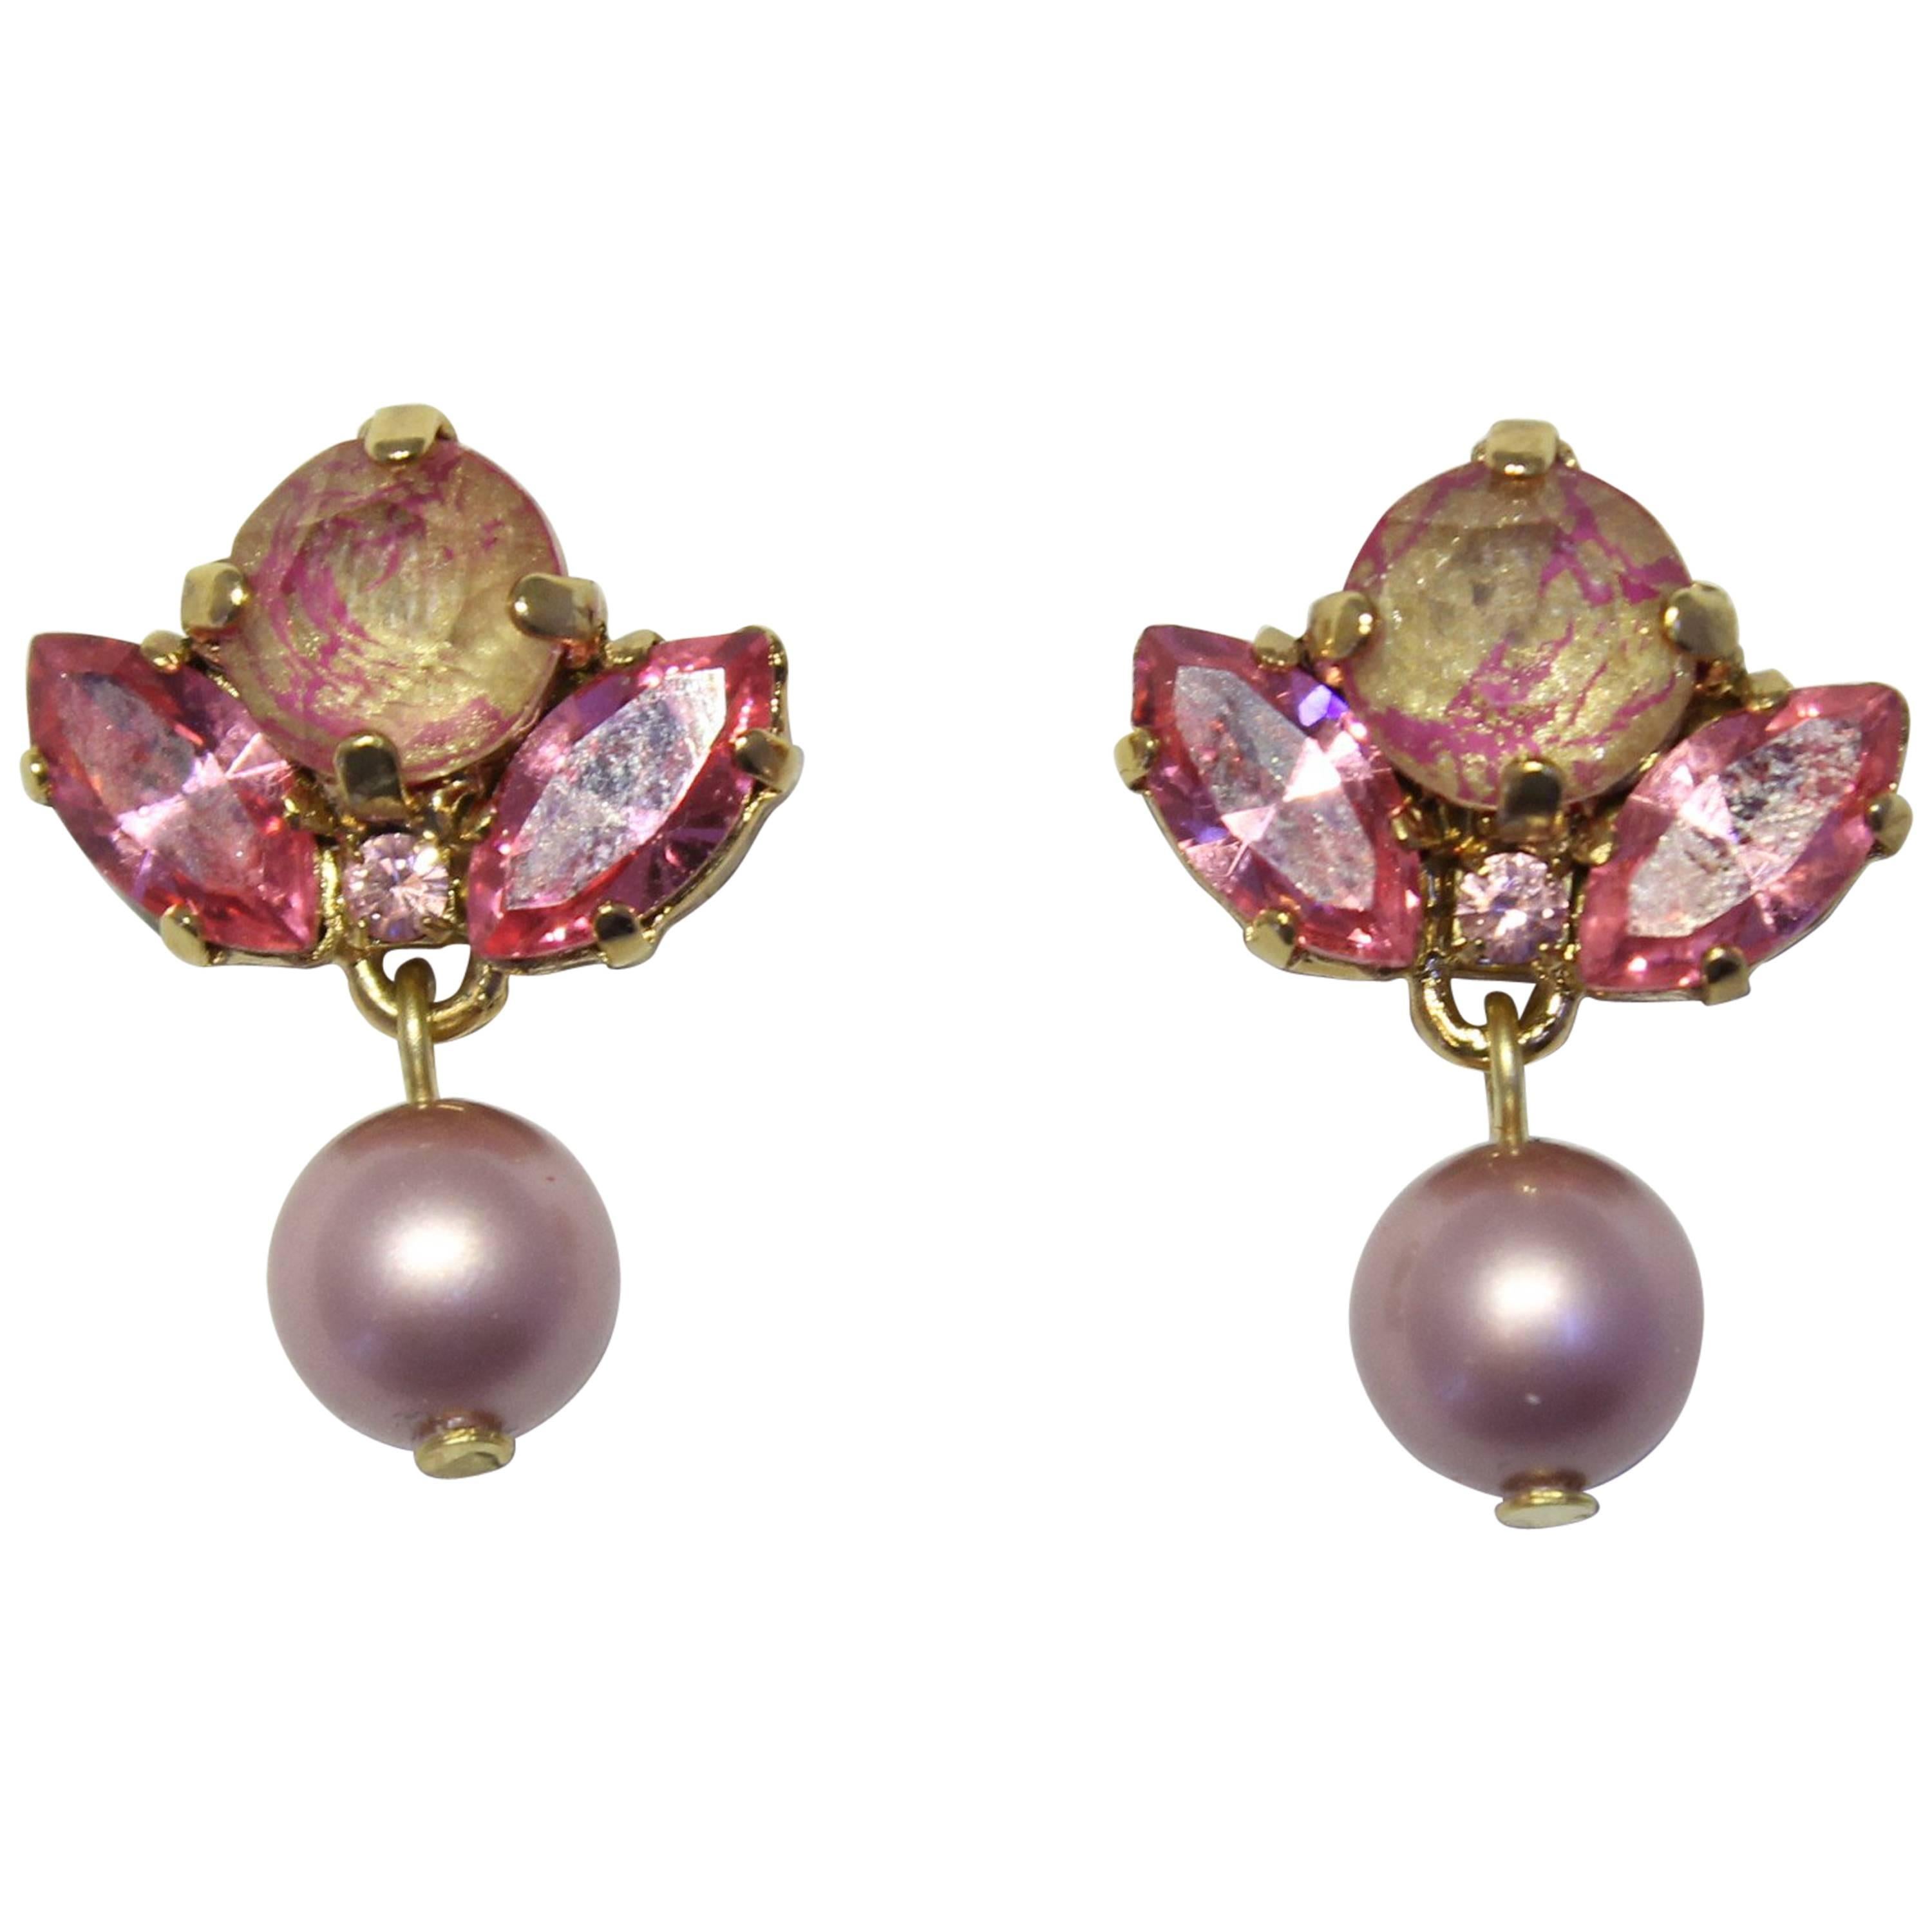 Gold-Plated Swarovski Crystal and Pearl Drop Earrings